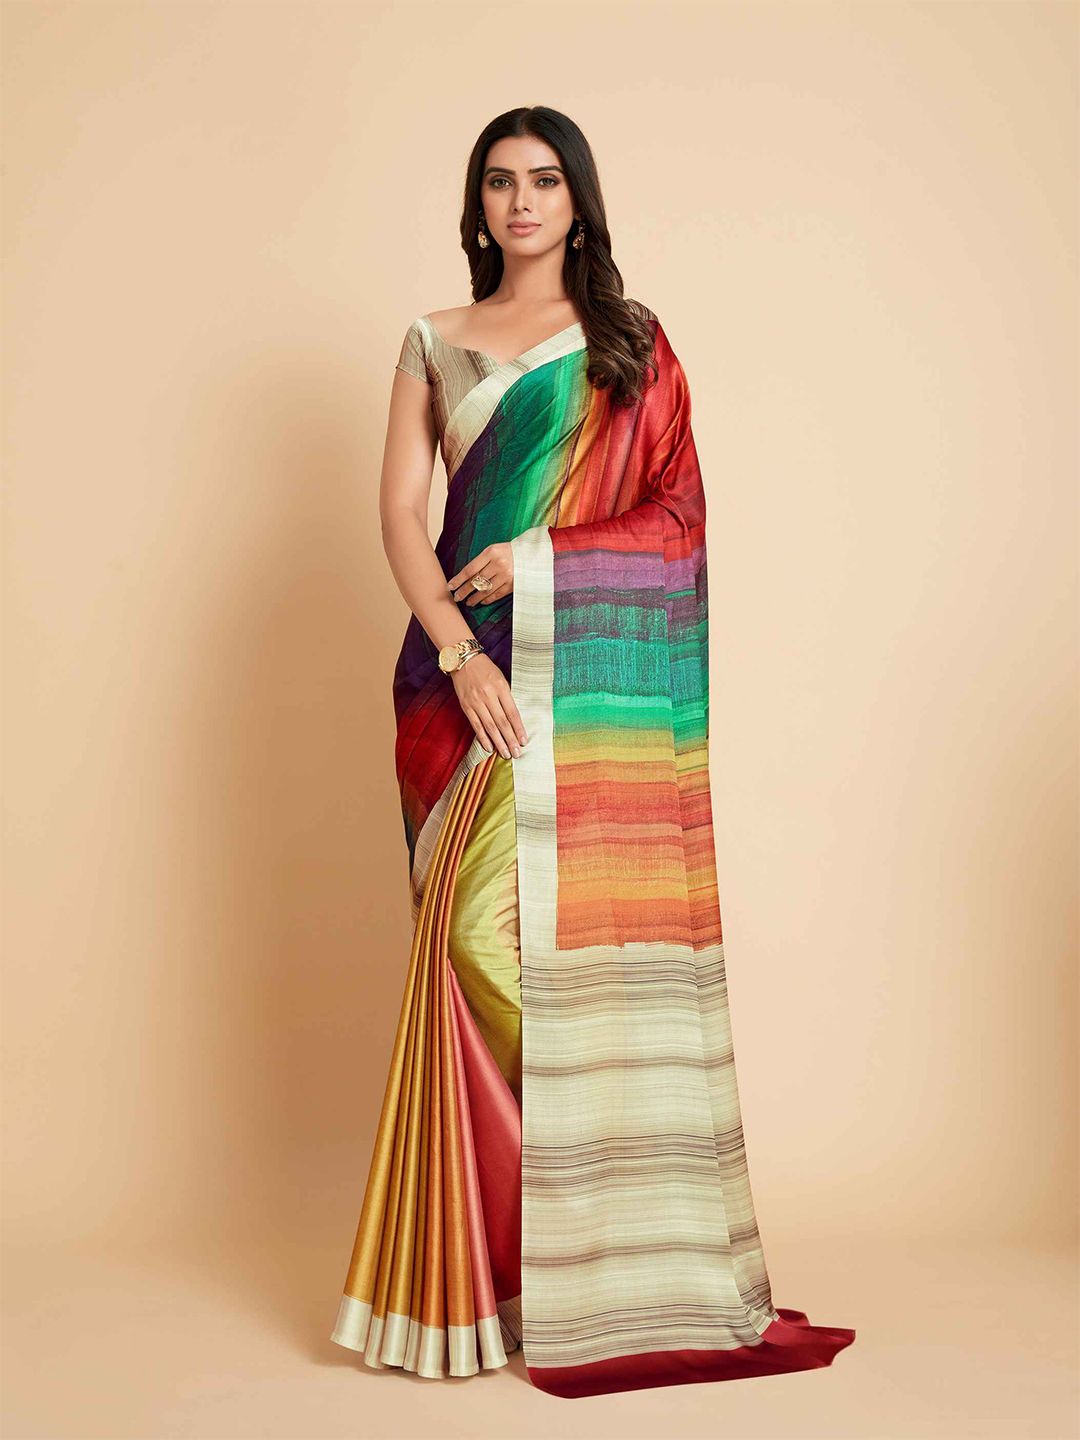 all about you Gold-Toned & Red Colourblocked Satin Saree Price in India